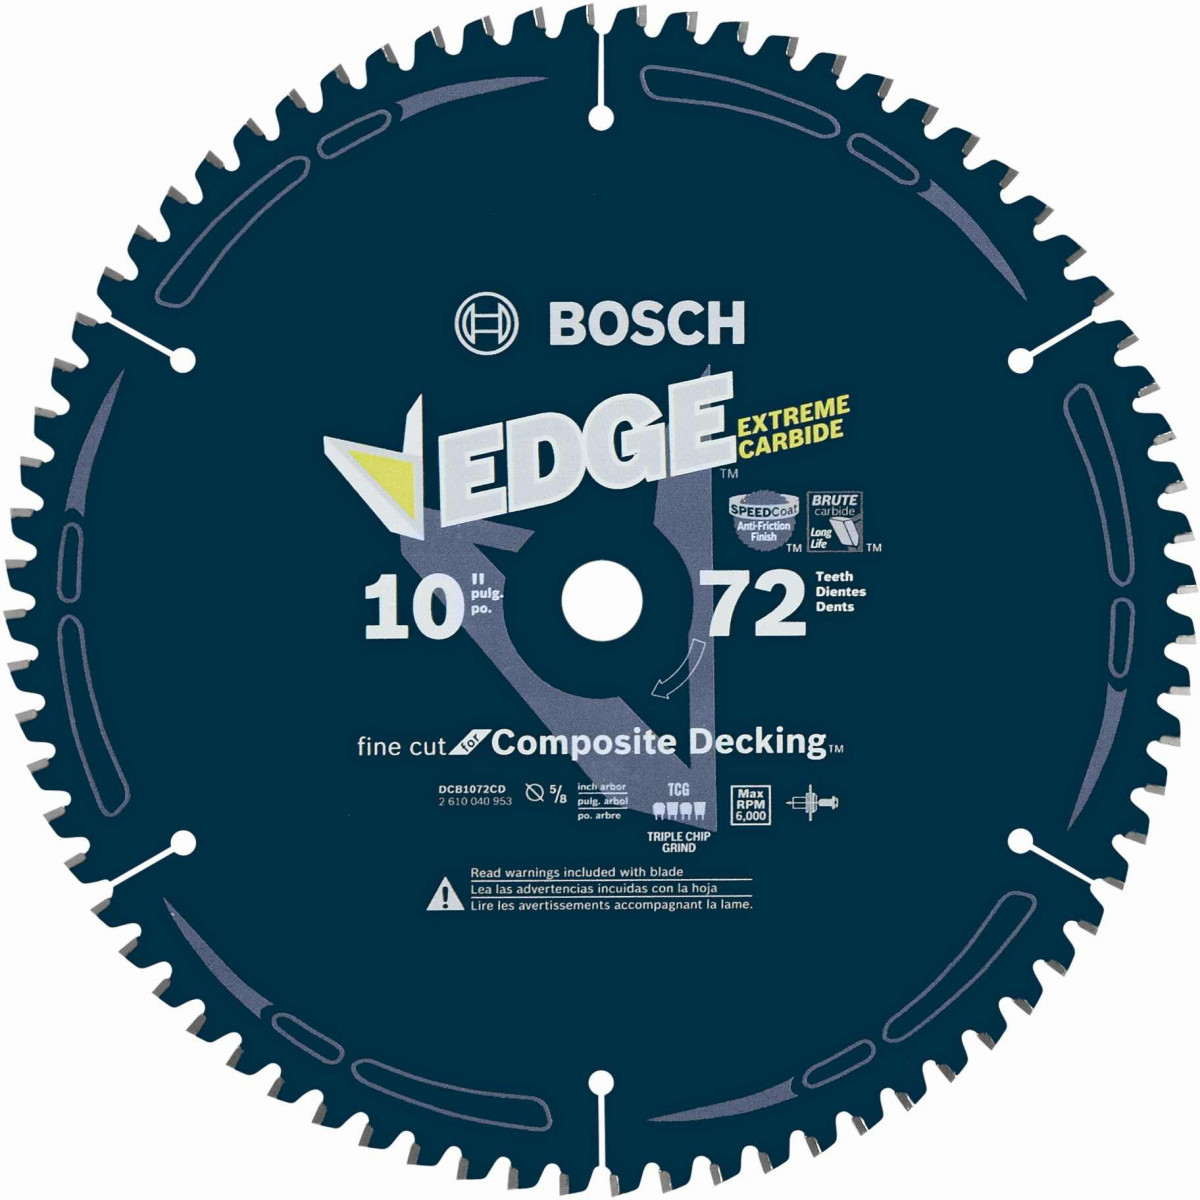 Bosch Dcb1072cd 10 72 Tooth Edge Circular Saw Blade For Composite for sizing 1200 X 1200